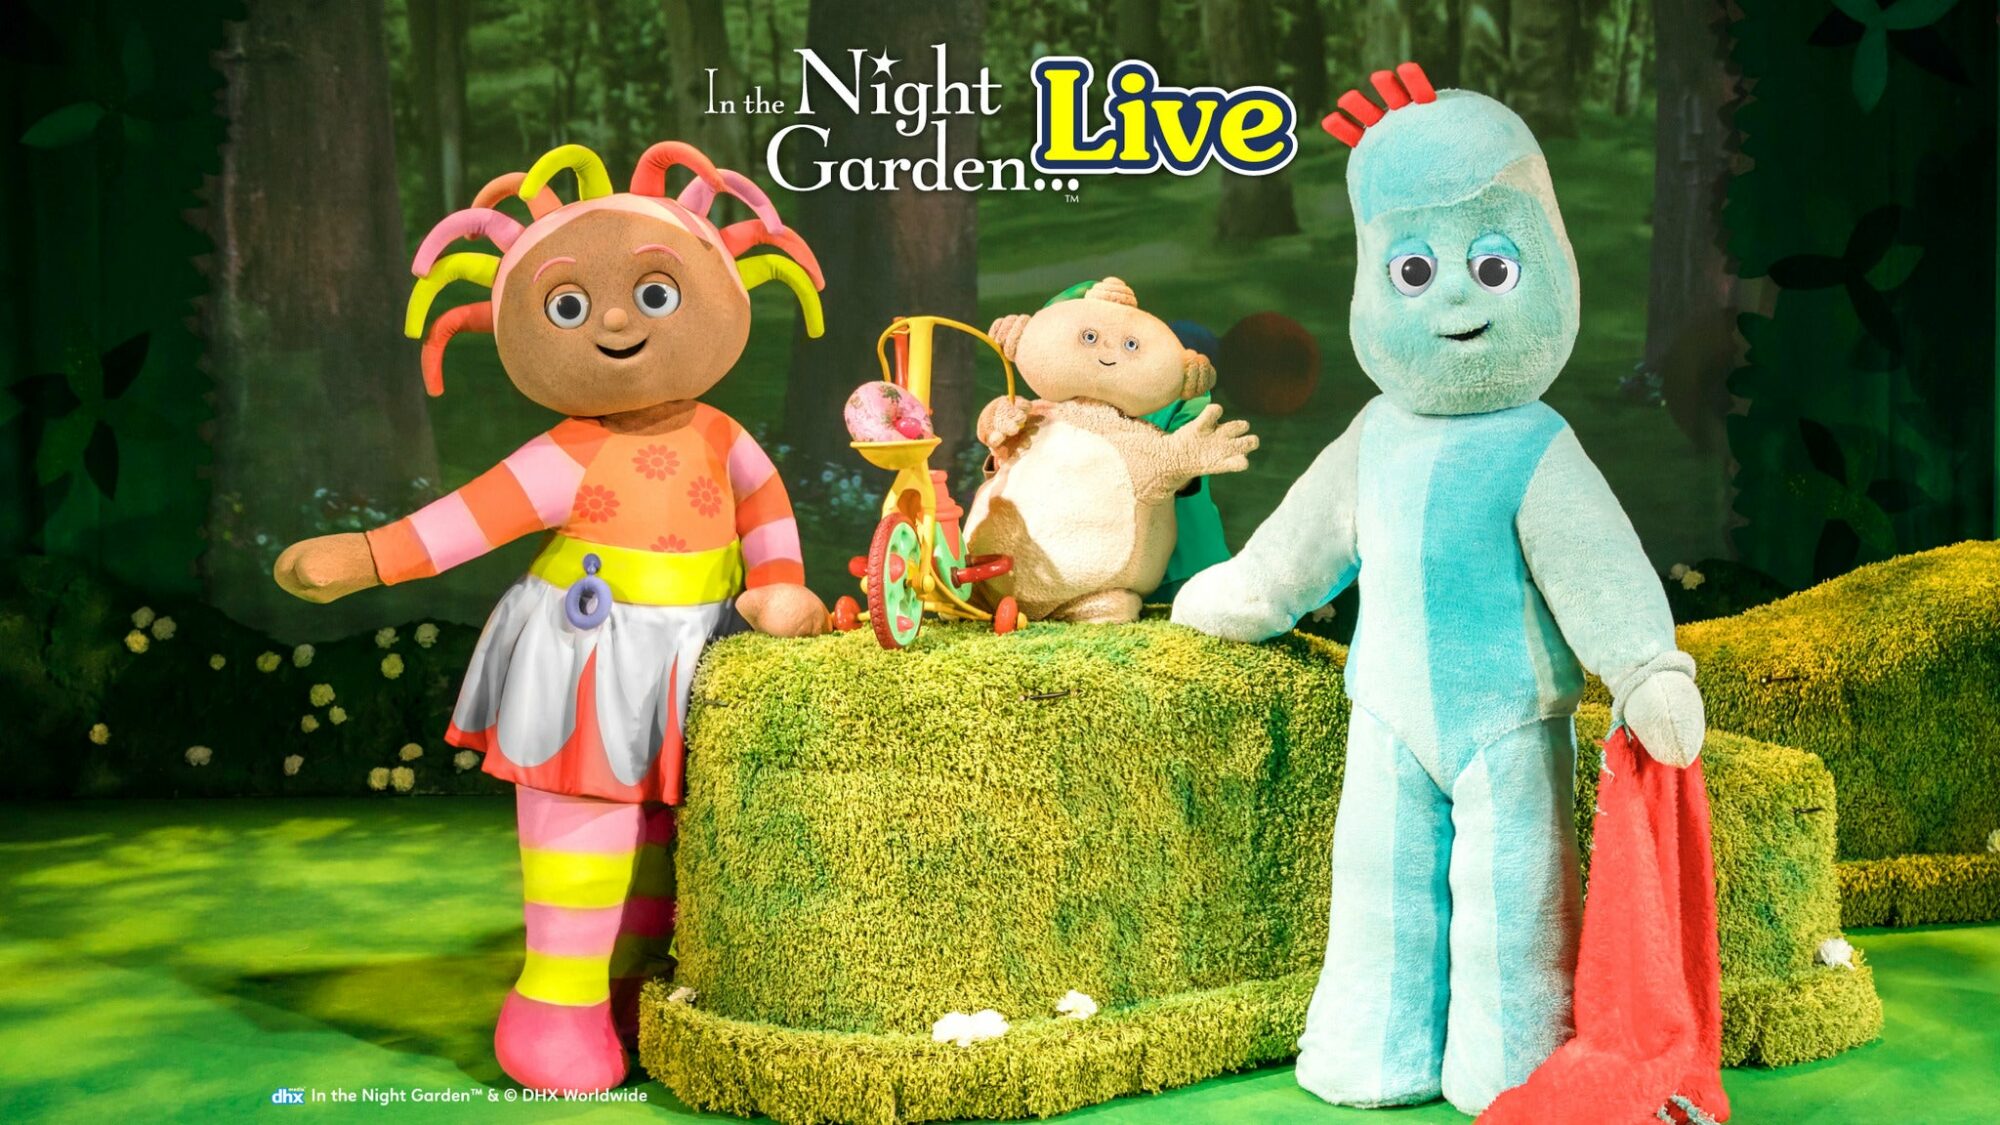 Image name In the Night Garden Live at Scarborough Spa Grand Hall Scarborough the 26 image from the post In the Night Garden Live at Scarborough Spa Grand Hall, Scarborough in Yorkshire.com.